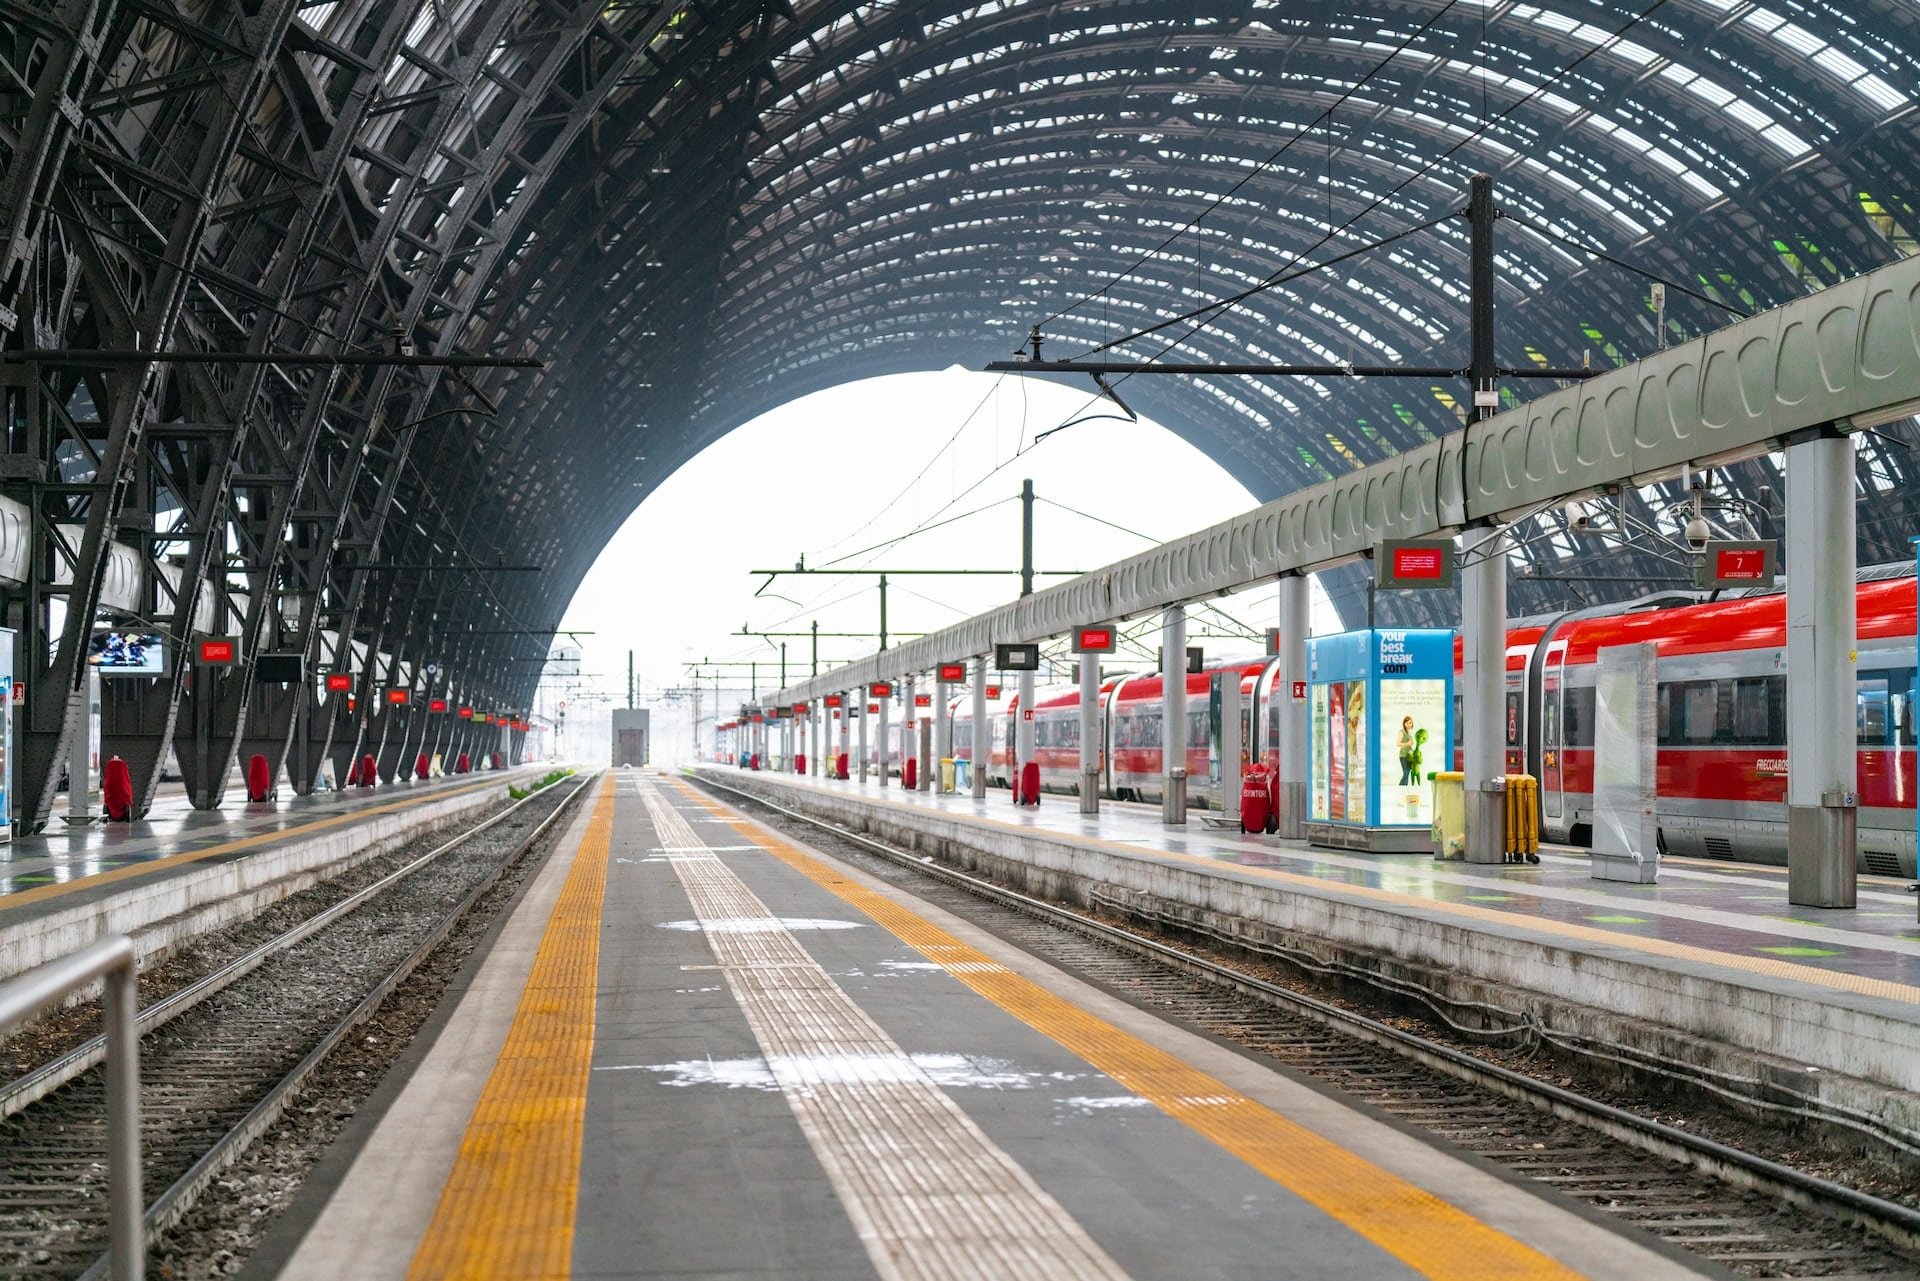 Centered around one of Europe's largest train stations, this area offers excellent connections with other Italian and European destinations, as well as many budget and mid-range hotels.